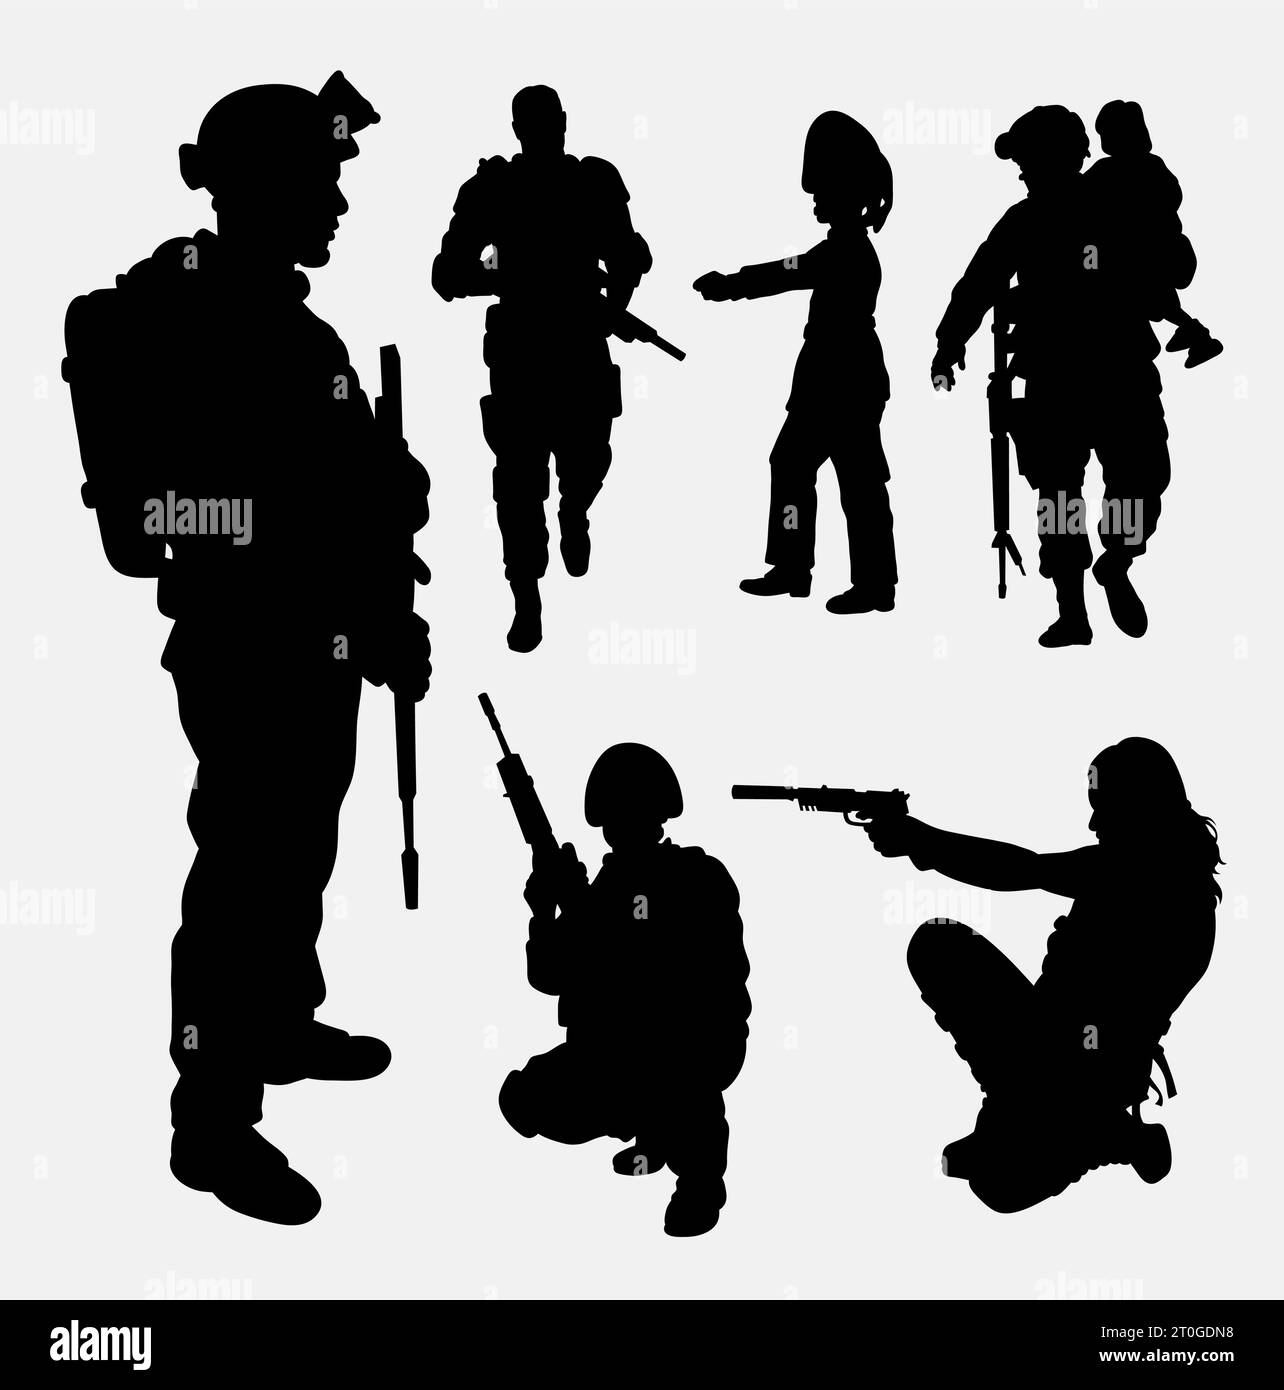 army people with gun silhouette Stock Vector